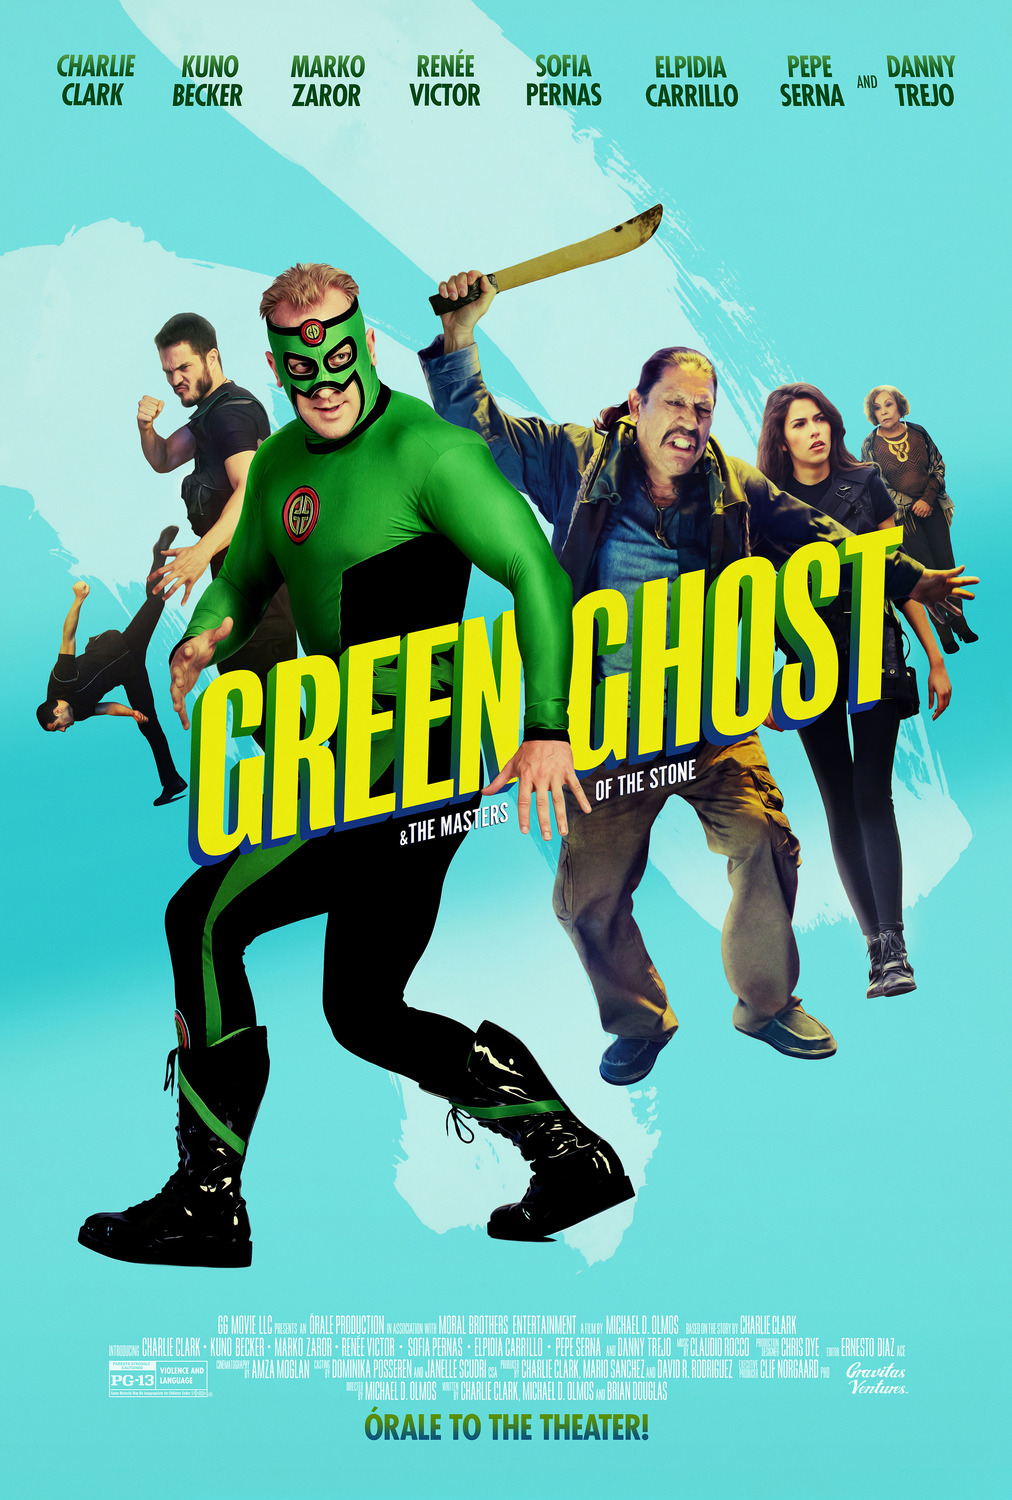 Extra Large Movie Poster Image for Green Ghost and the Masters of the Stone 